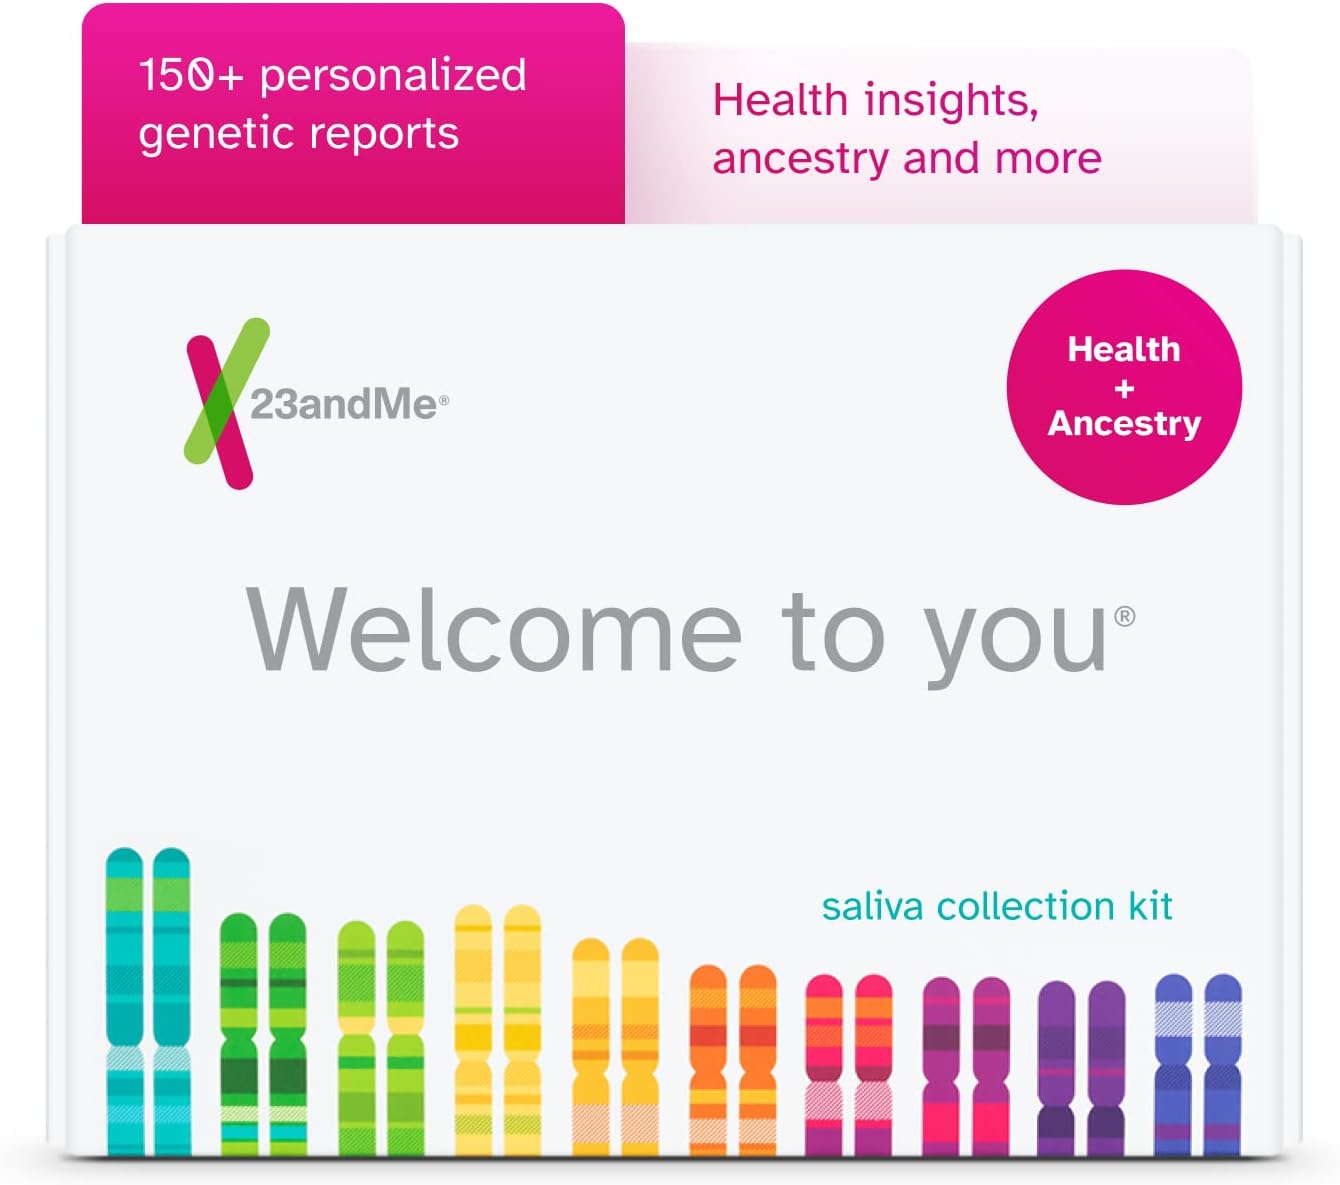 Get the 23andMe+ Premium Membership Bundle - DNA Kit with Personal Genetic Insights Including Health + Ancestry Service Plus 1-Year Access to Exclusive Reports test kit, regularly $299.00 USD, now just $129.00 USD!